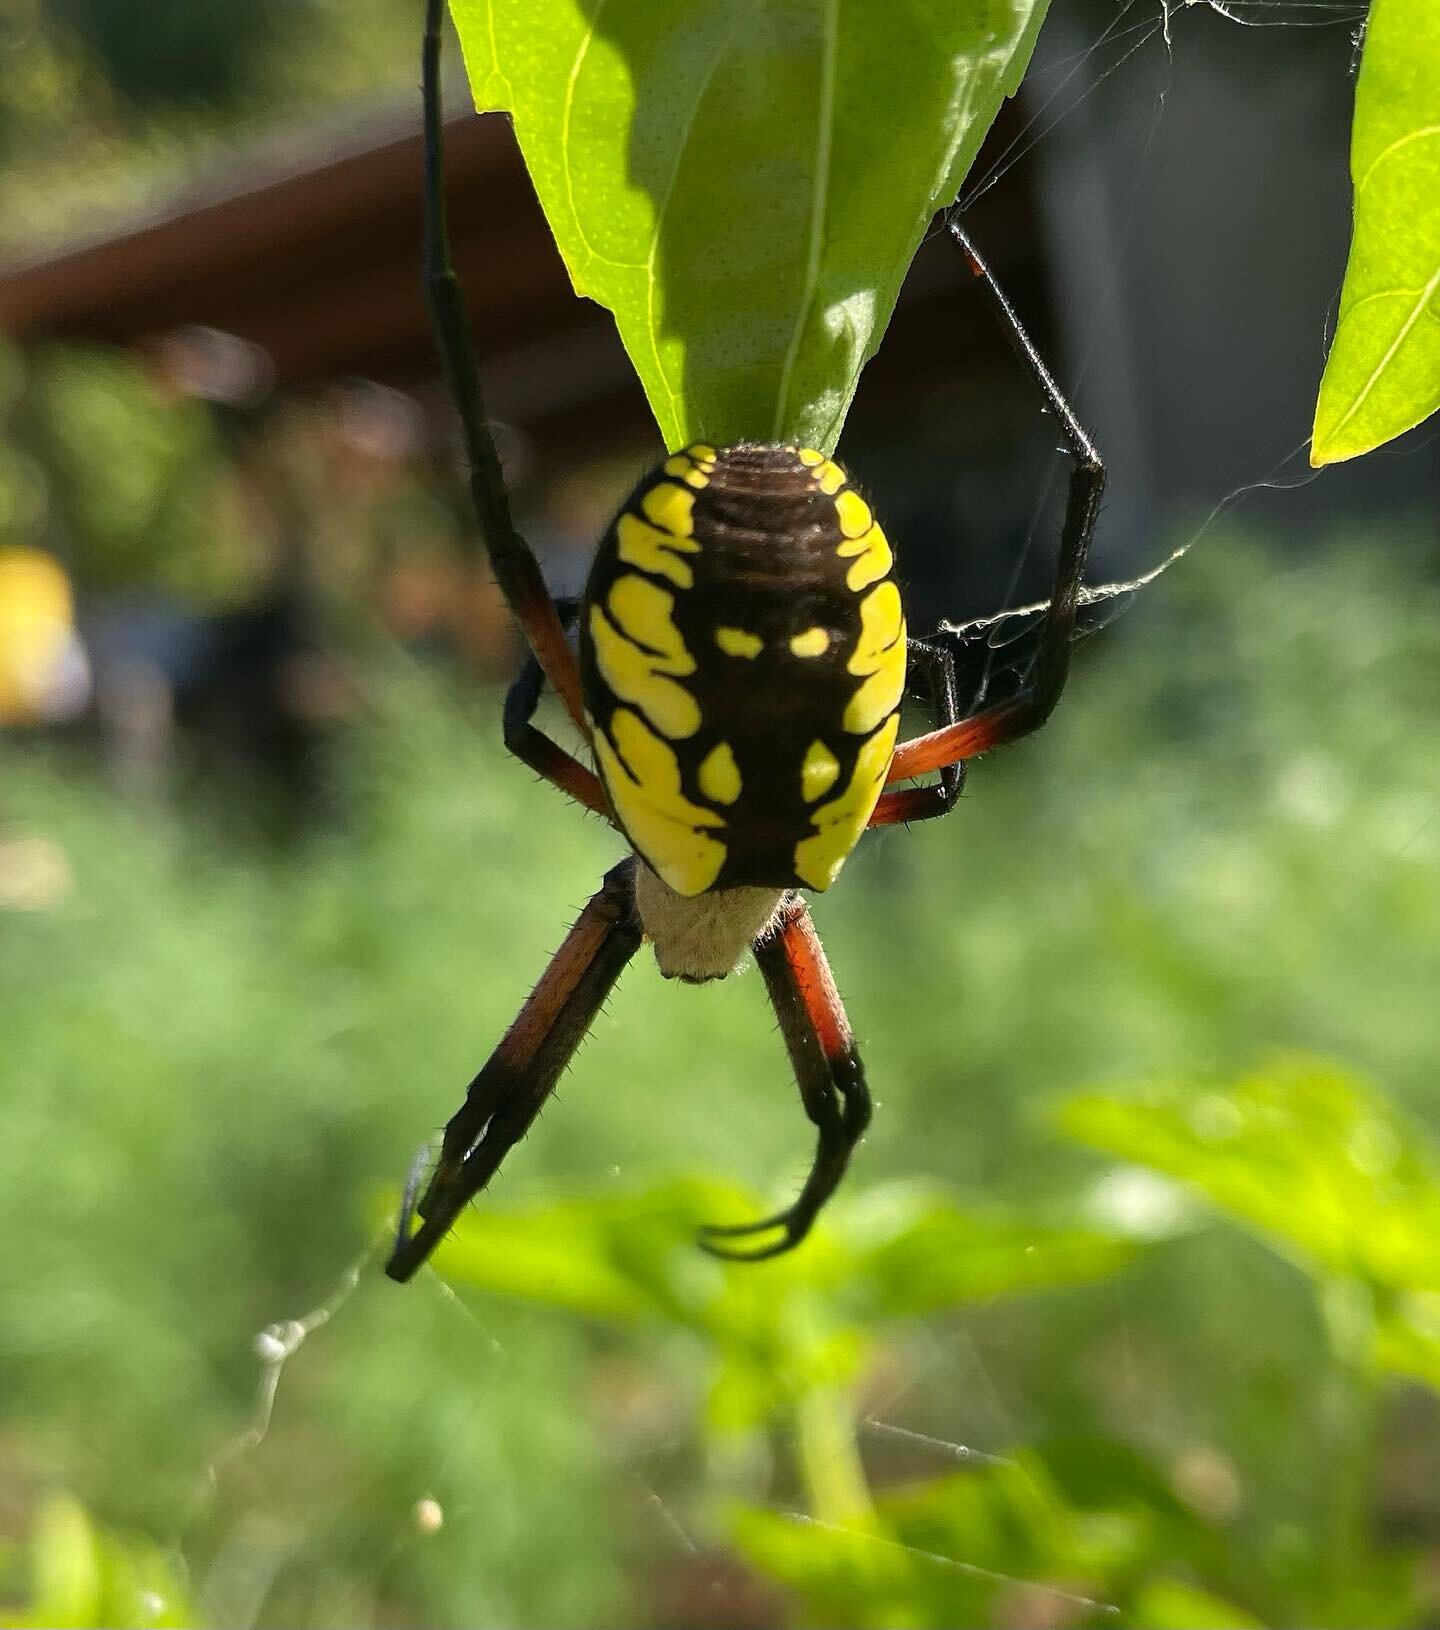 Found this gorgeous yellow garden spider while harvesting basil yesterday. It&rsquo;s web spans across 6 basil plants- none of which I dare disturb. Beautiful. 
#spider #pnwfarm #regenerativeagriculture #regenerativefarming #farmlife #farmcritters #n